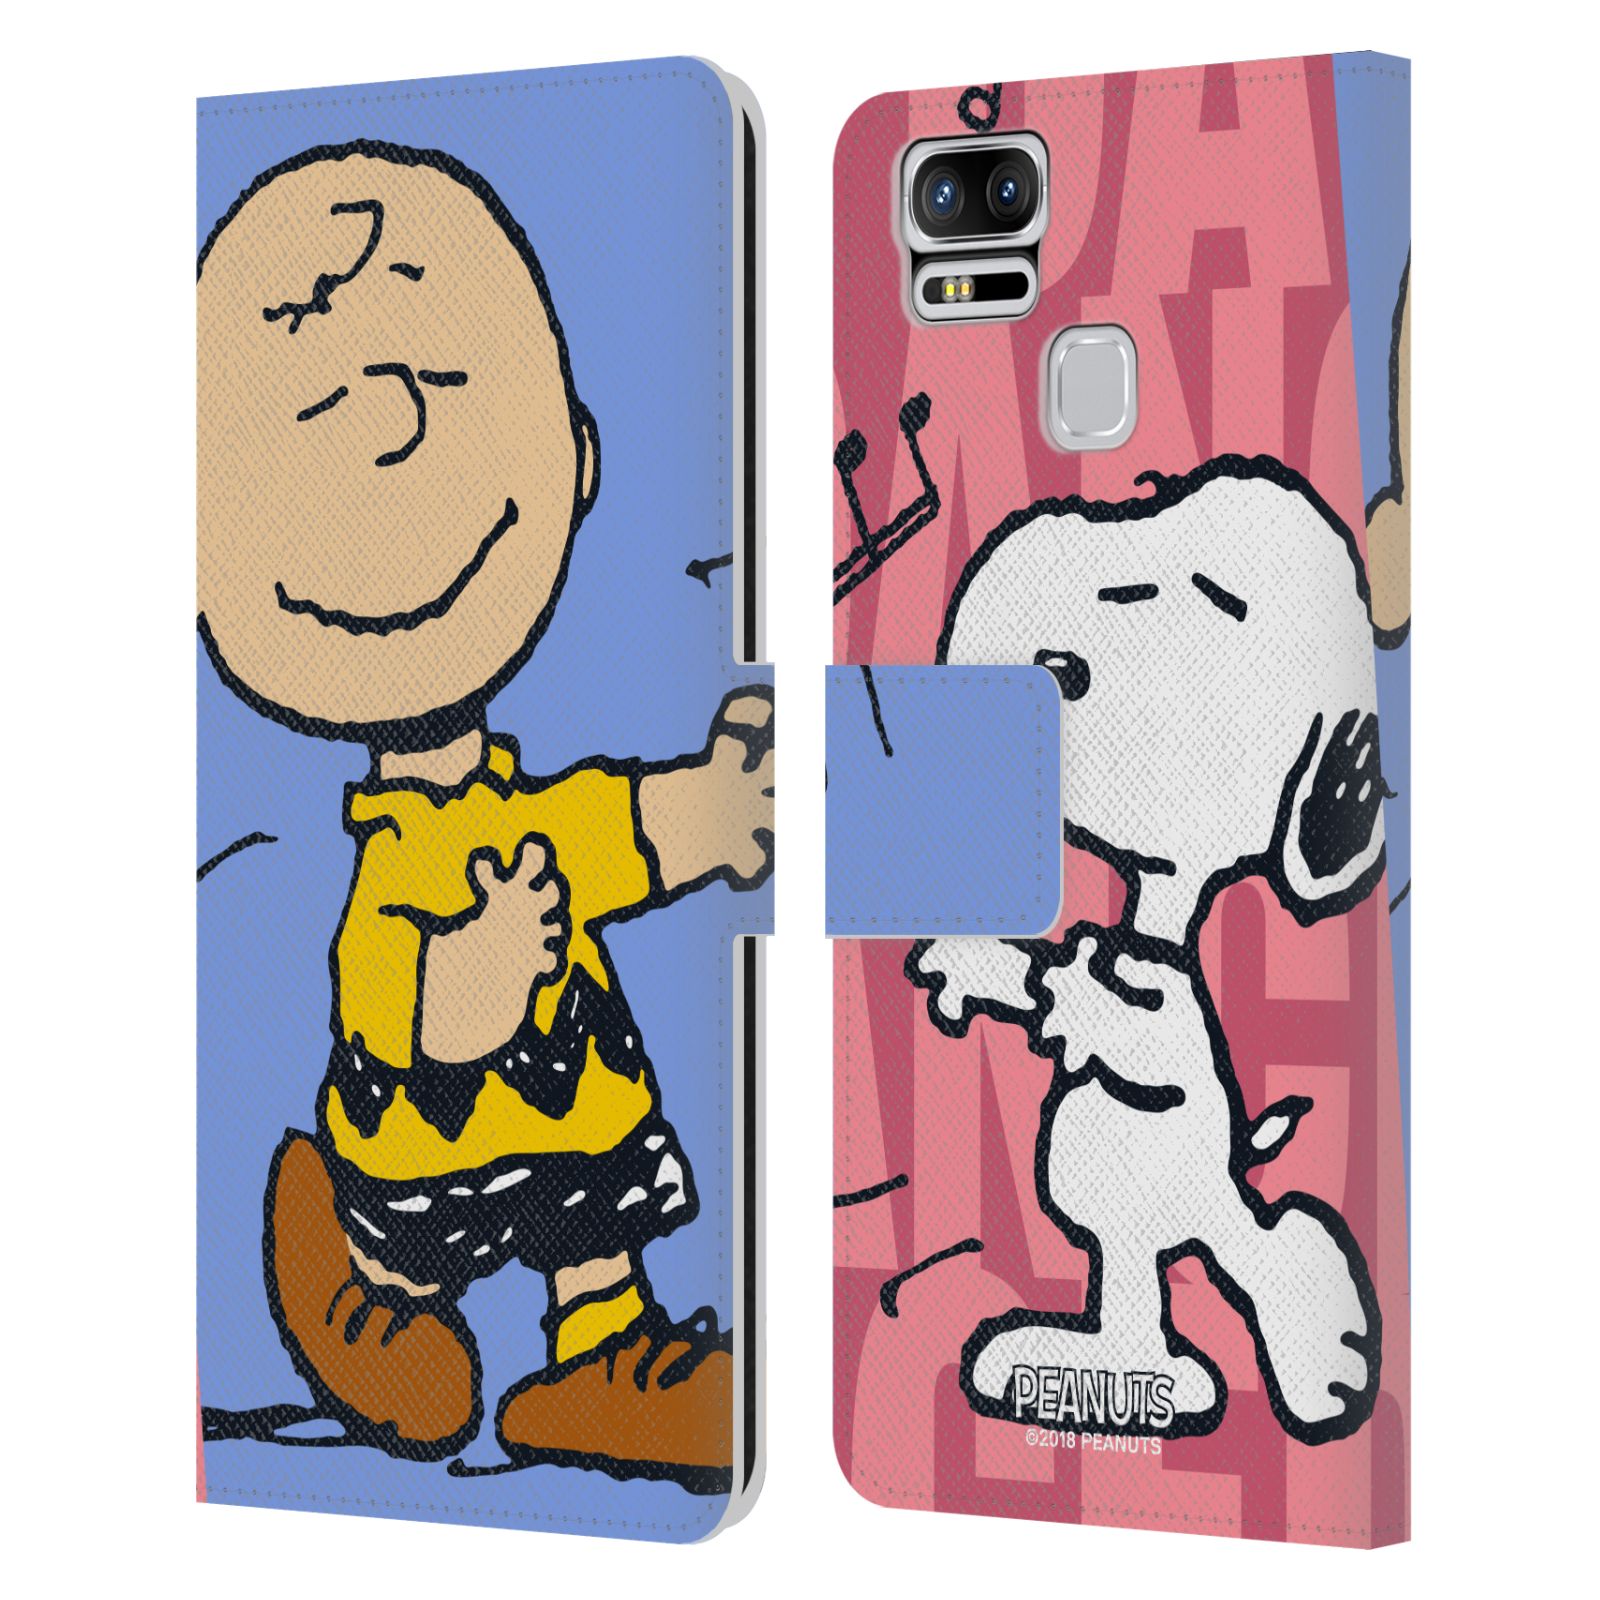 Pouzdro na mobil Asus Zenfone 3 Zoom ZE553KL - Head Case - Peanuts - Snoopy a Charlie